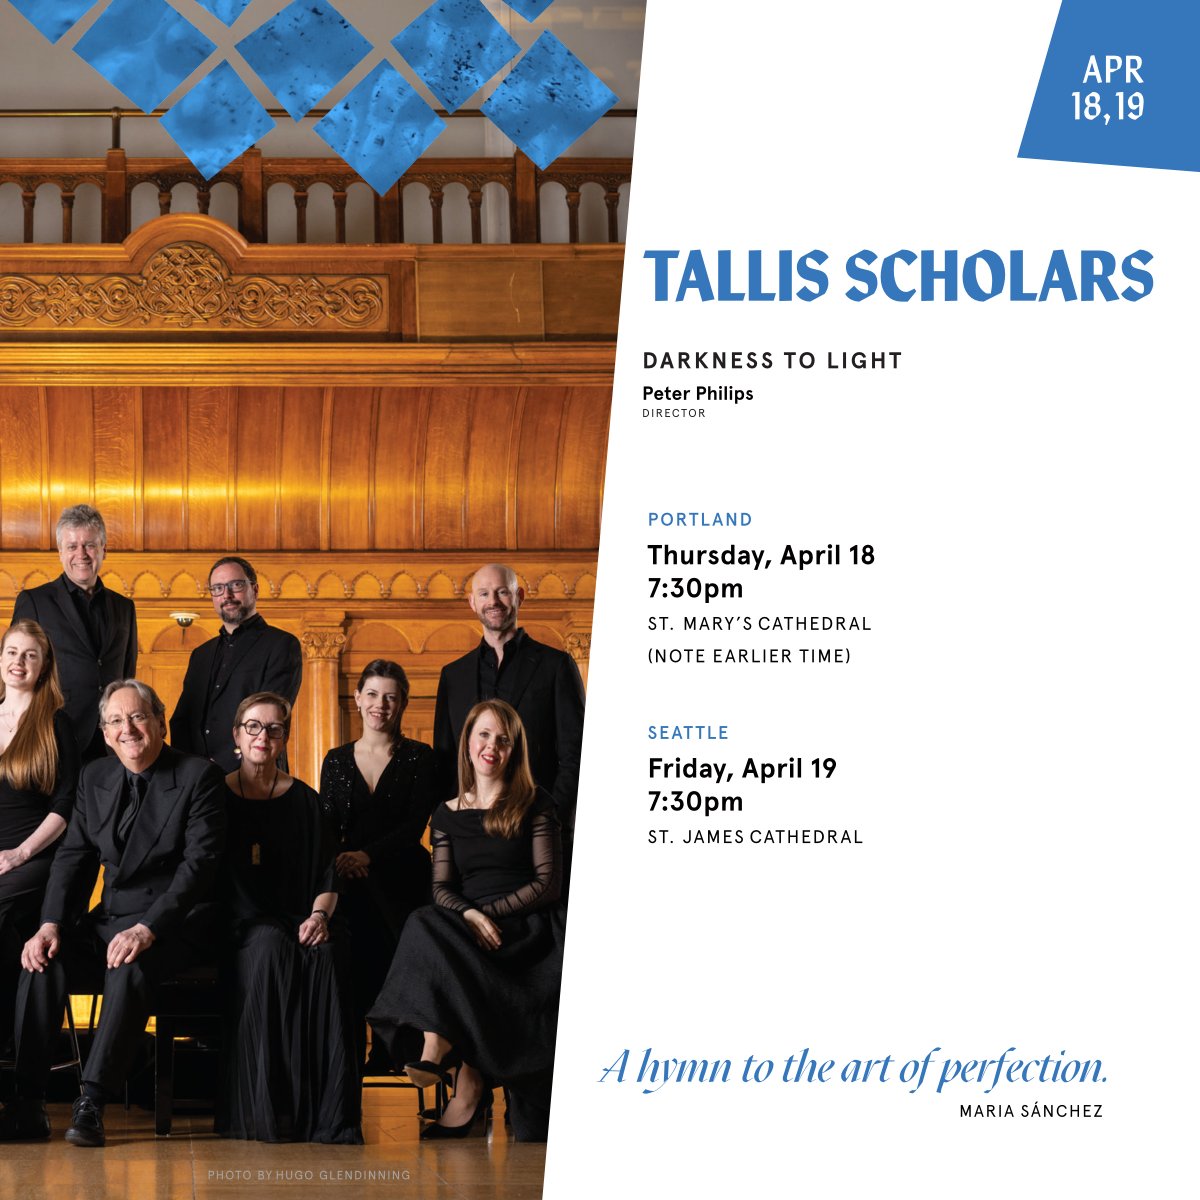 No tricks, no fools, just your reminder to get your tickets for this month's #Seattle and #Portland presentations of “The rock stars of Renaissance vocal music”, the Tallis Scholars! Tickets on sale at cappellaromana.org/tallis